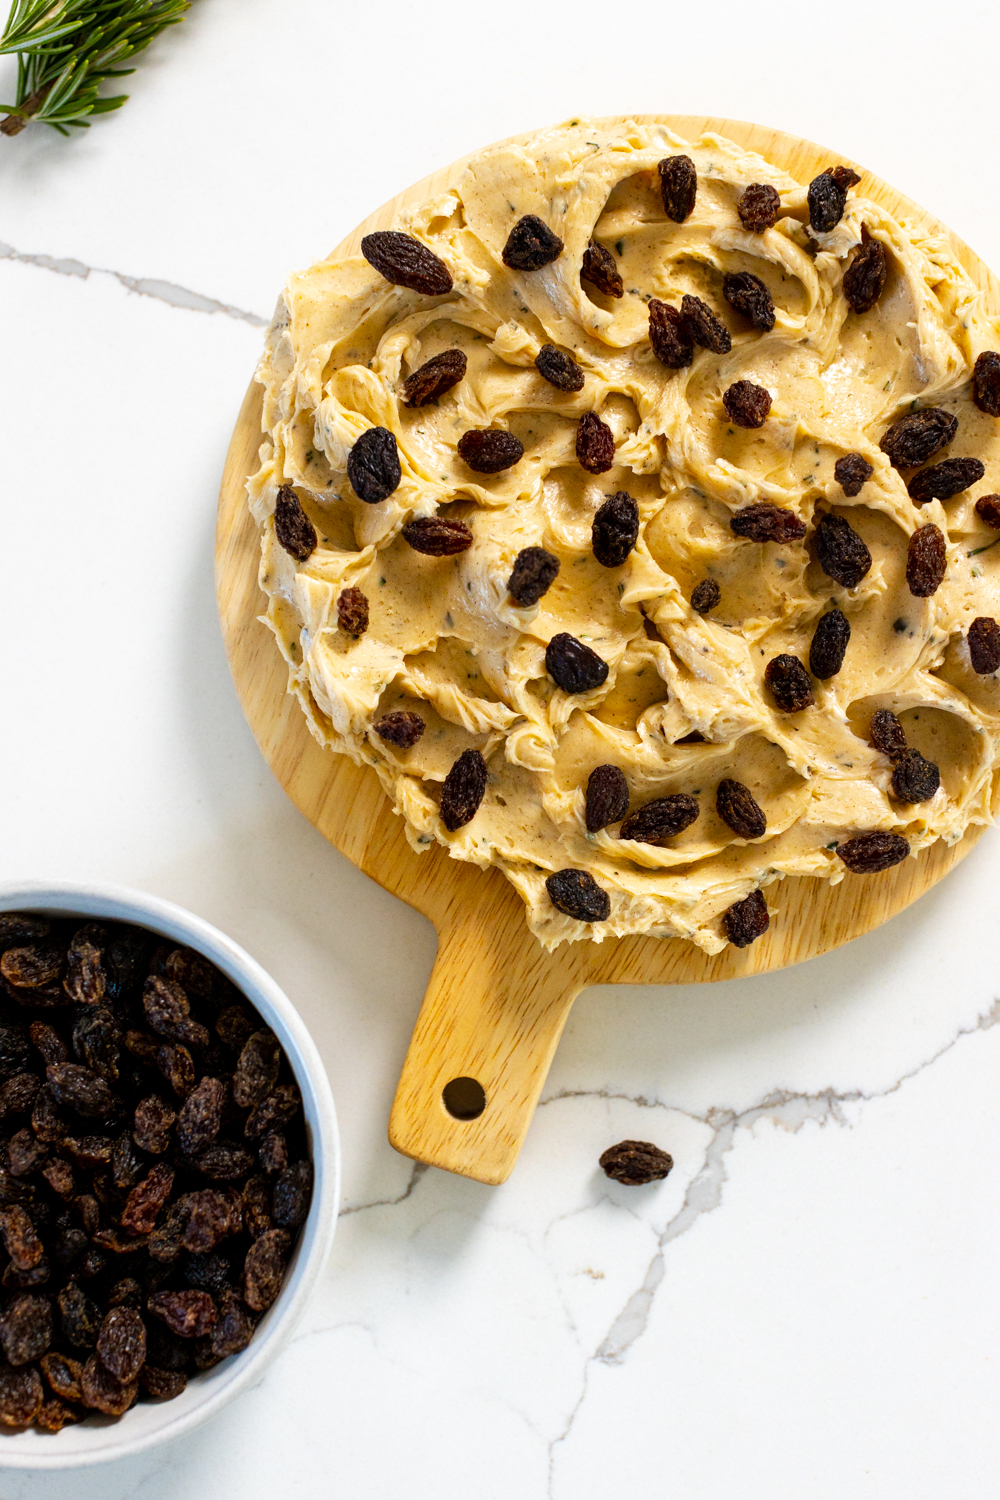 Topping butter board with raisins